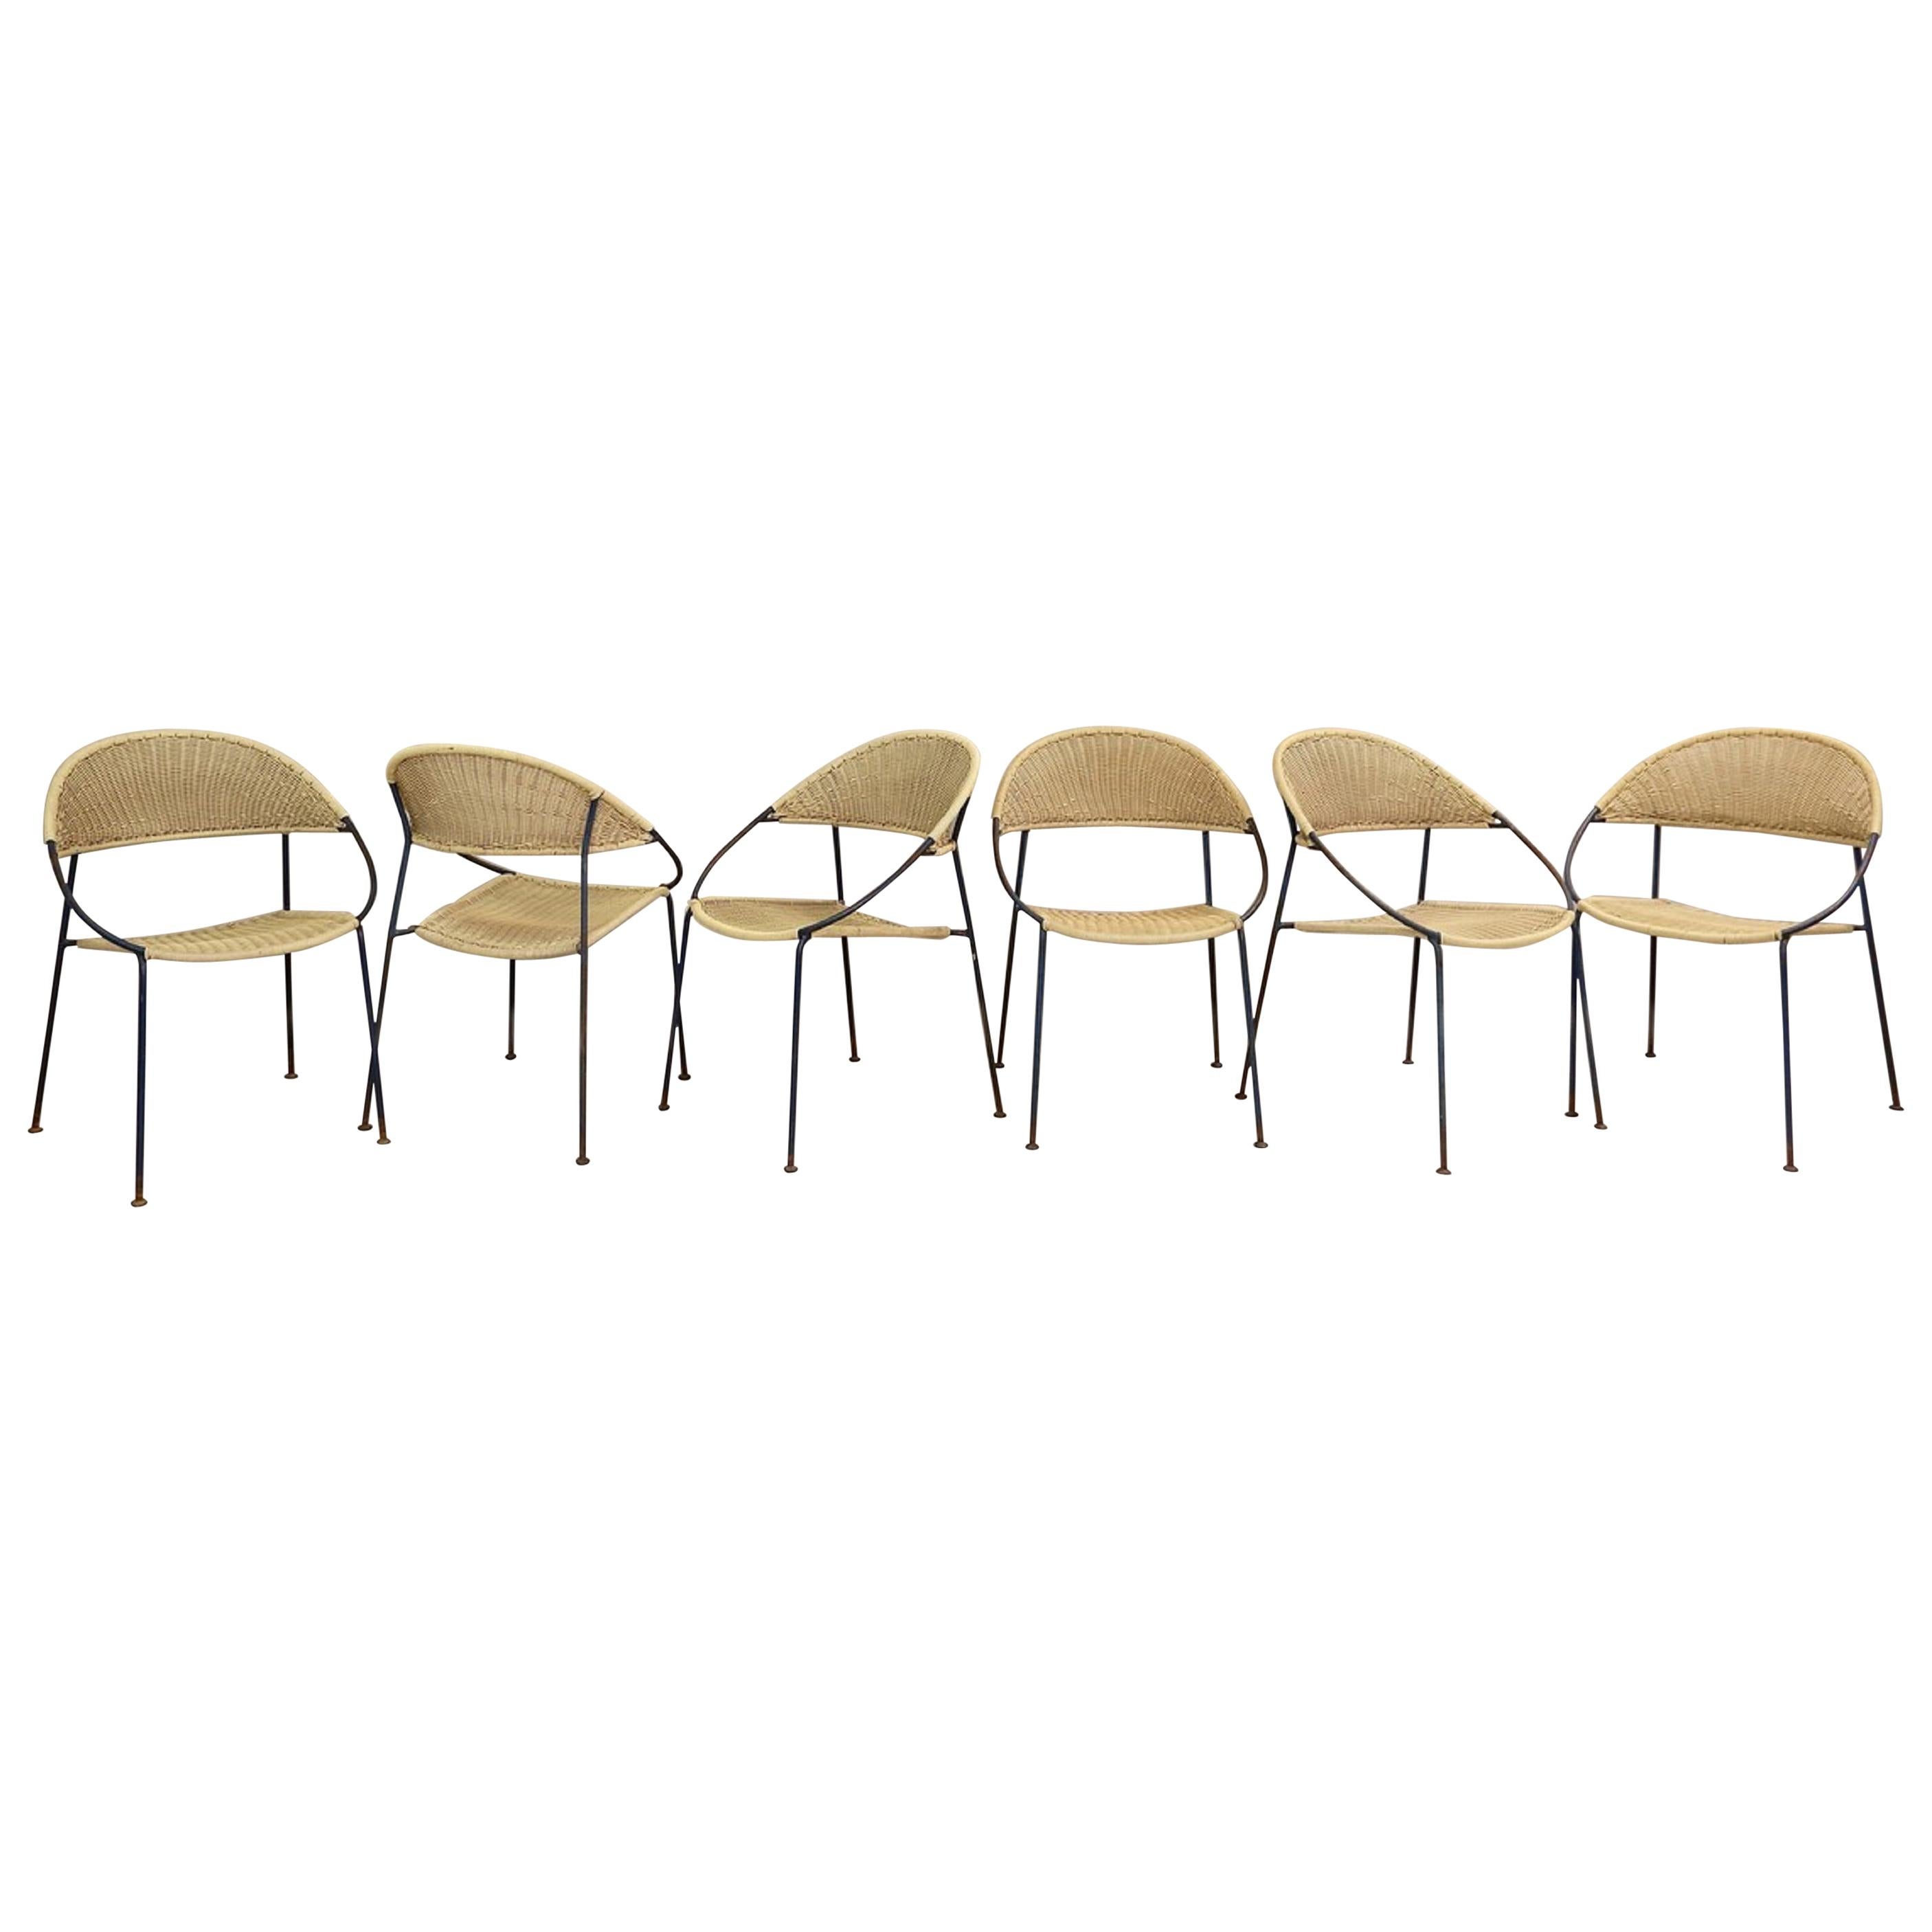 Set of 6 Chairs Model DU41 by Gastone Rinaldi for RIMA, Italy, 1956 For Sale